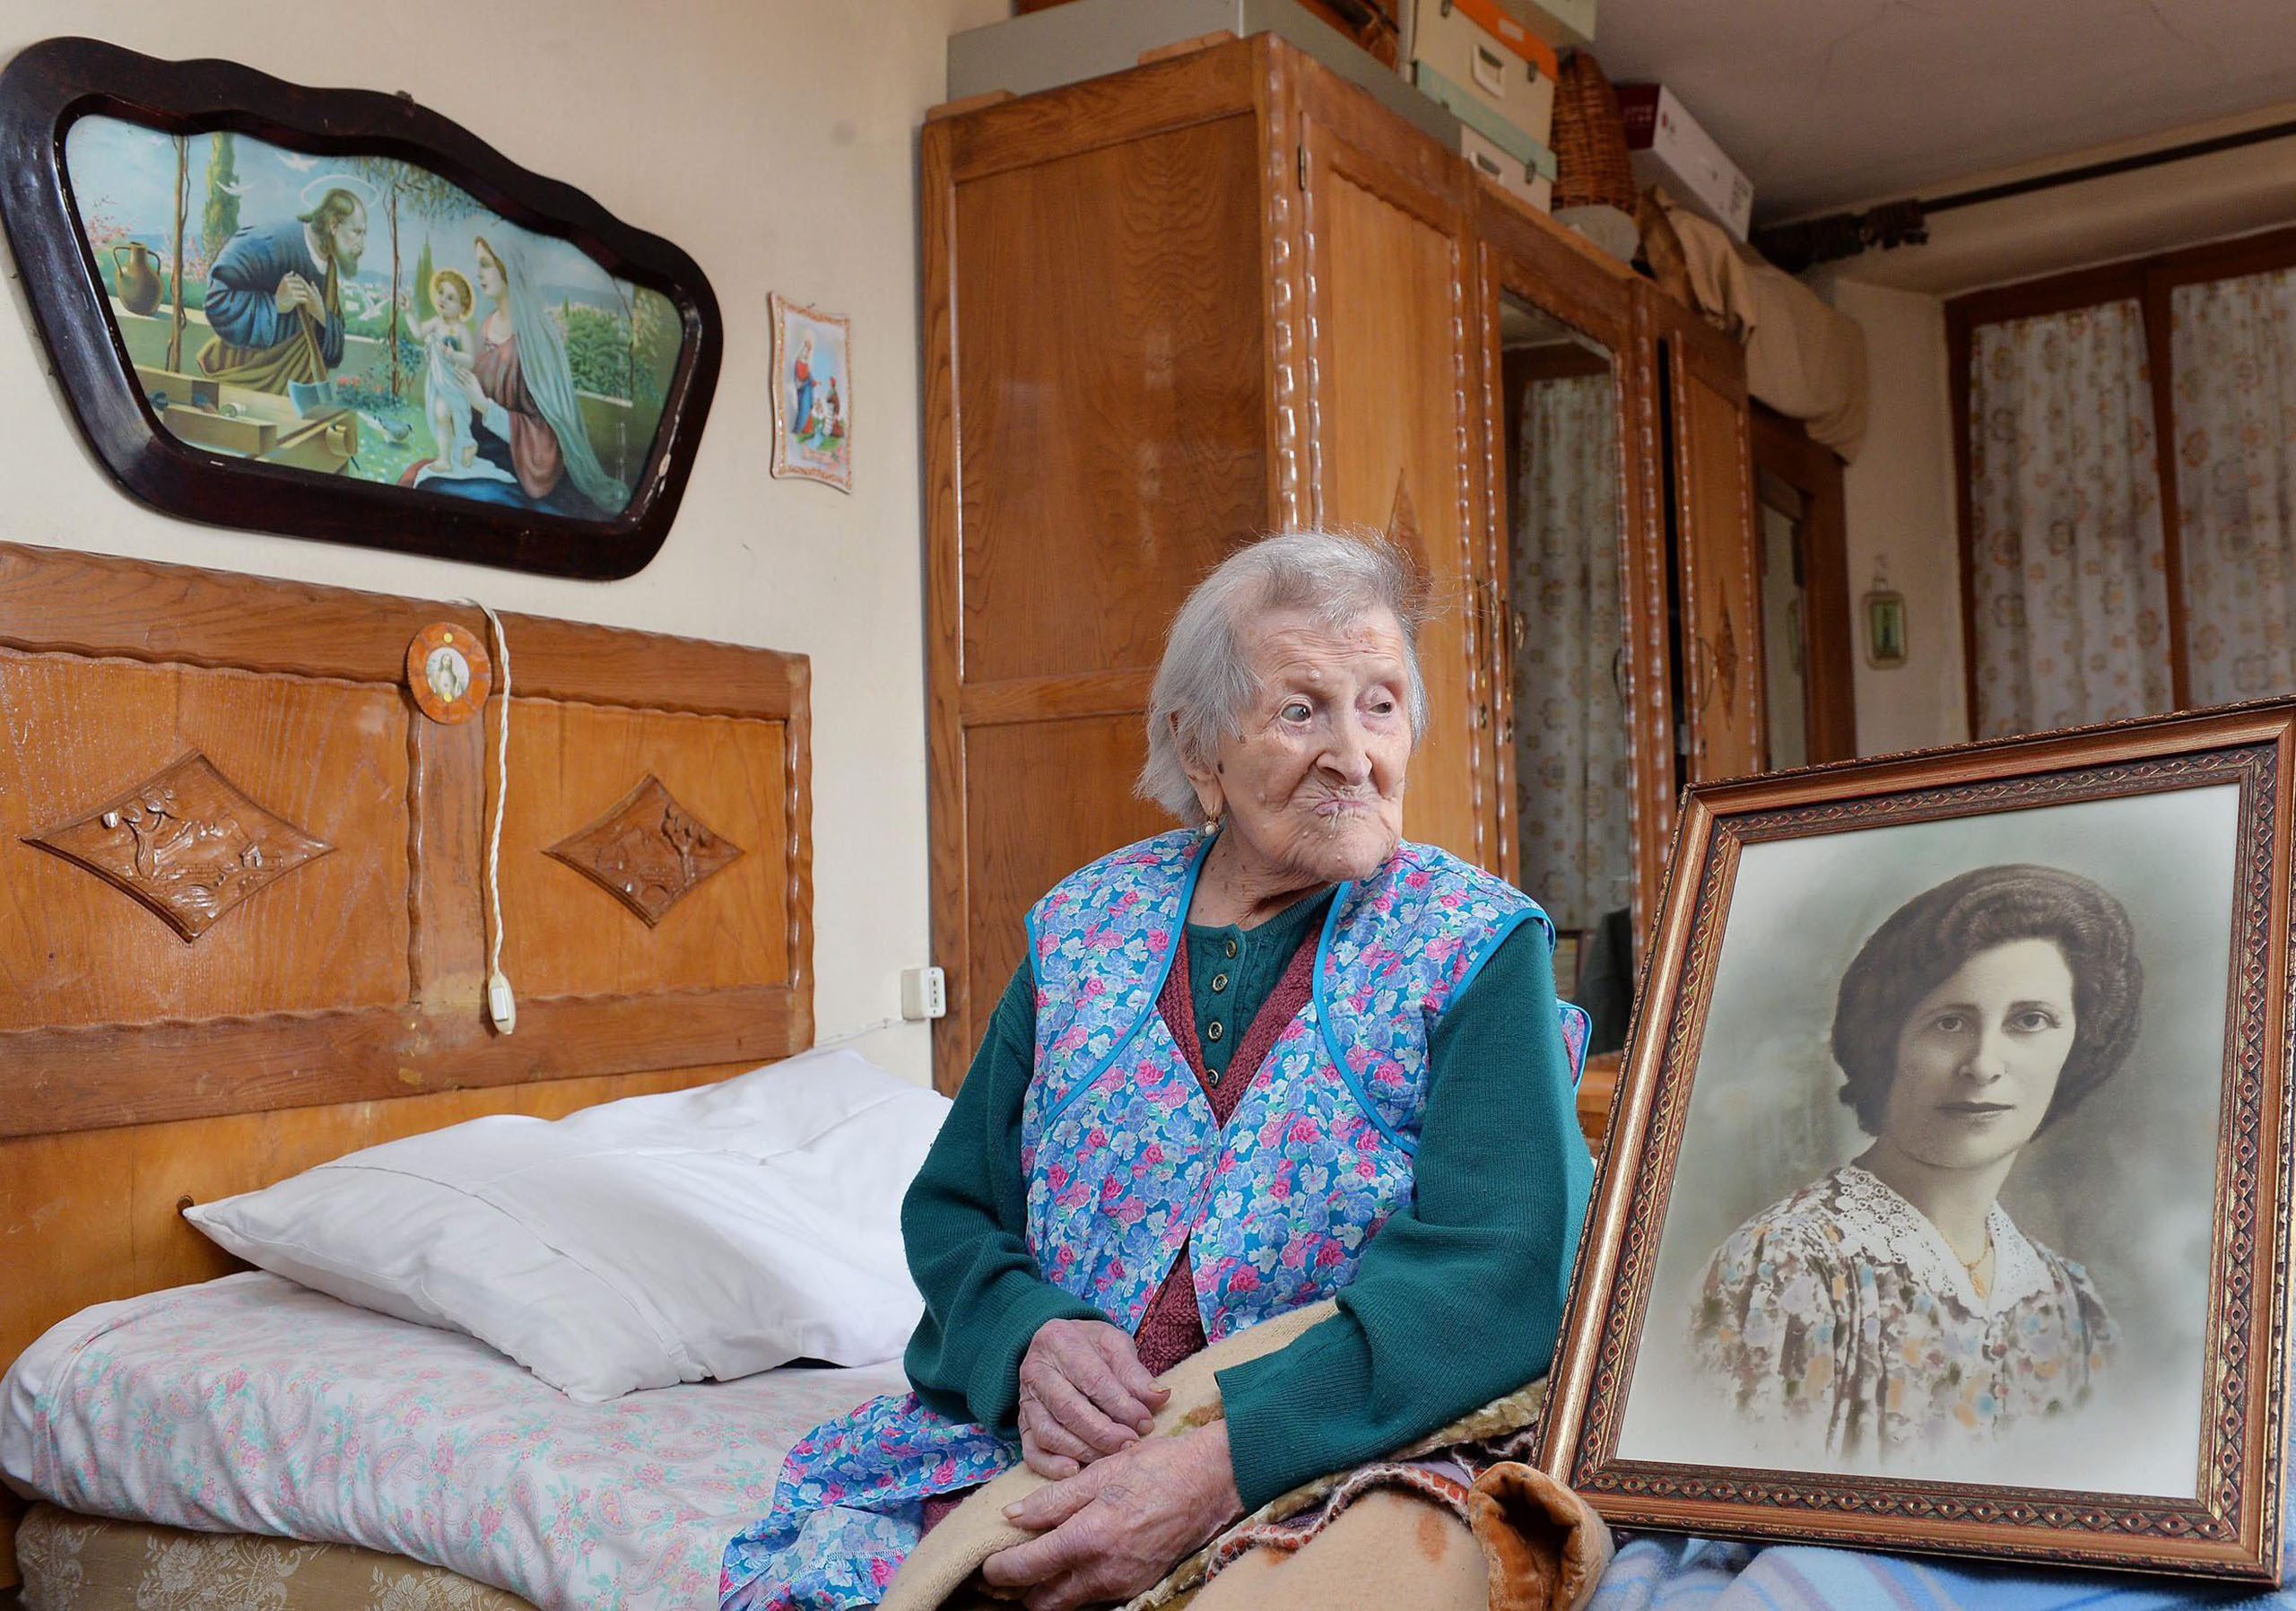 Emma Morano, 116, sits in her apartment nex to a picture depicting her where she was young in Verbania, northern Italy, May 13 2016. (Antonino di Marco—EPA)